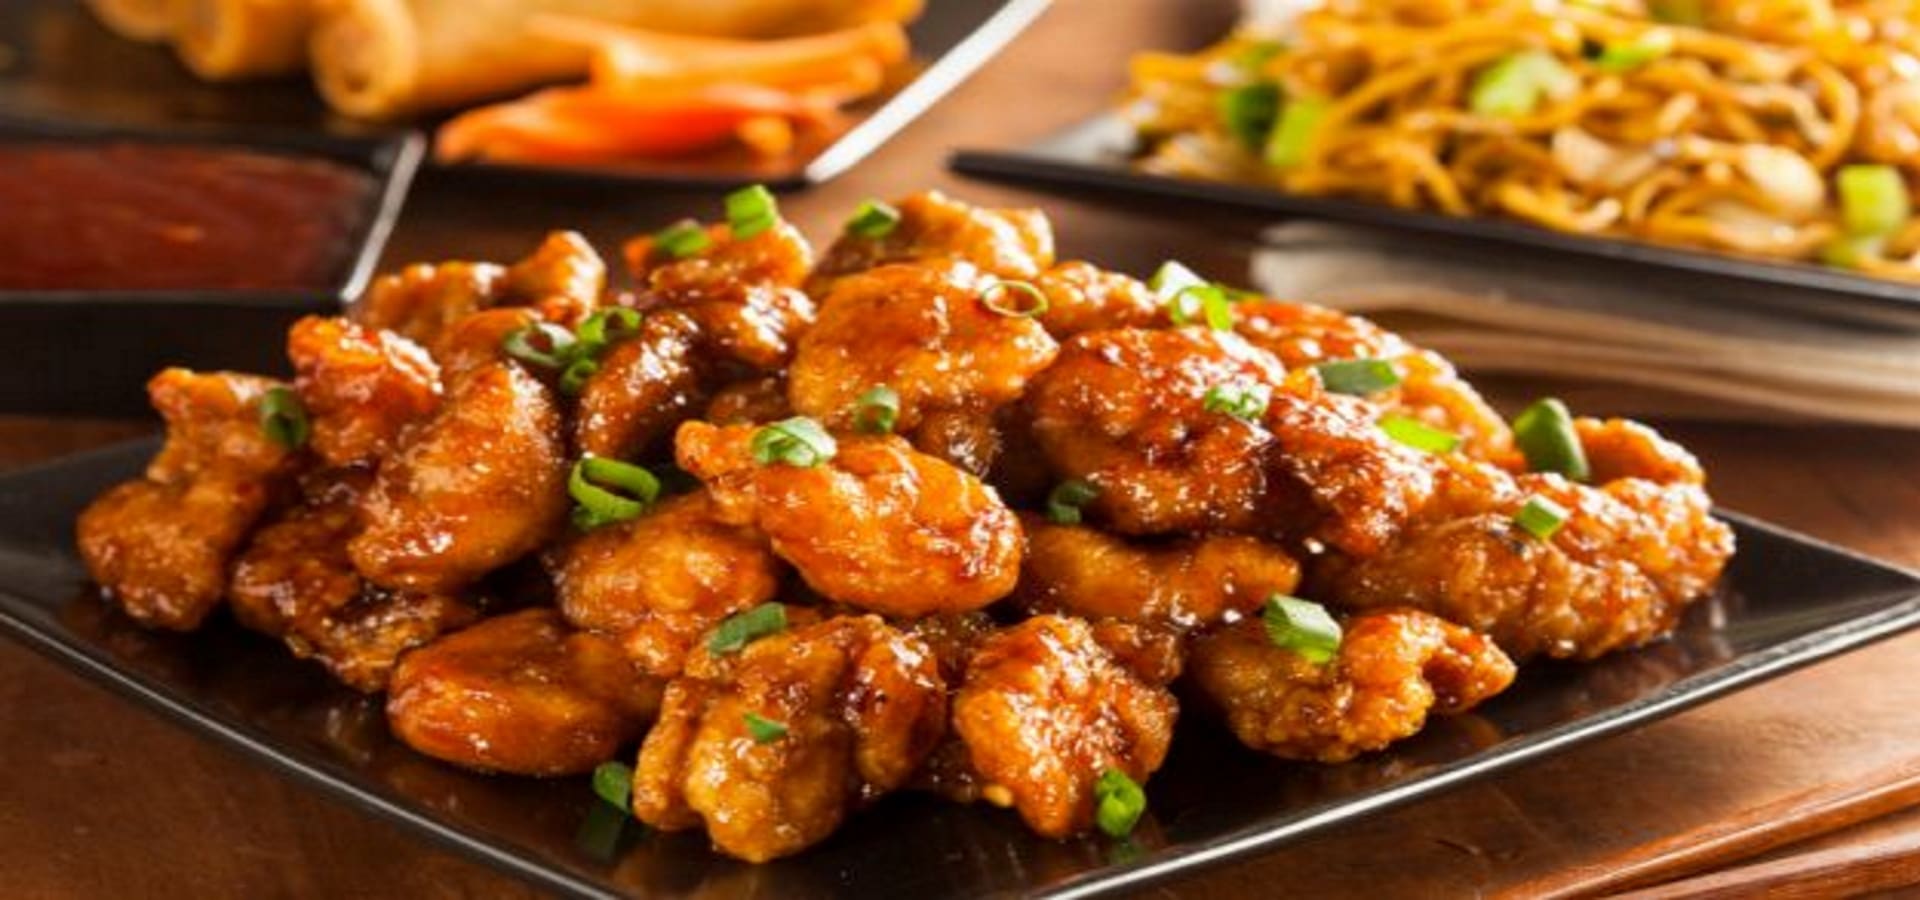 China Garden Order Online Concord Nc 28027 Pickup Delivery